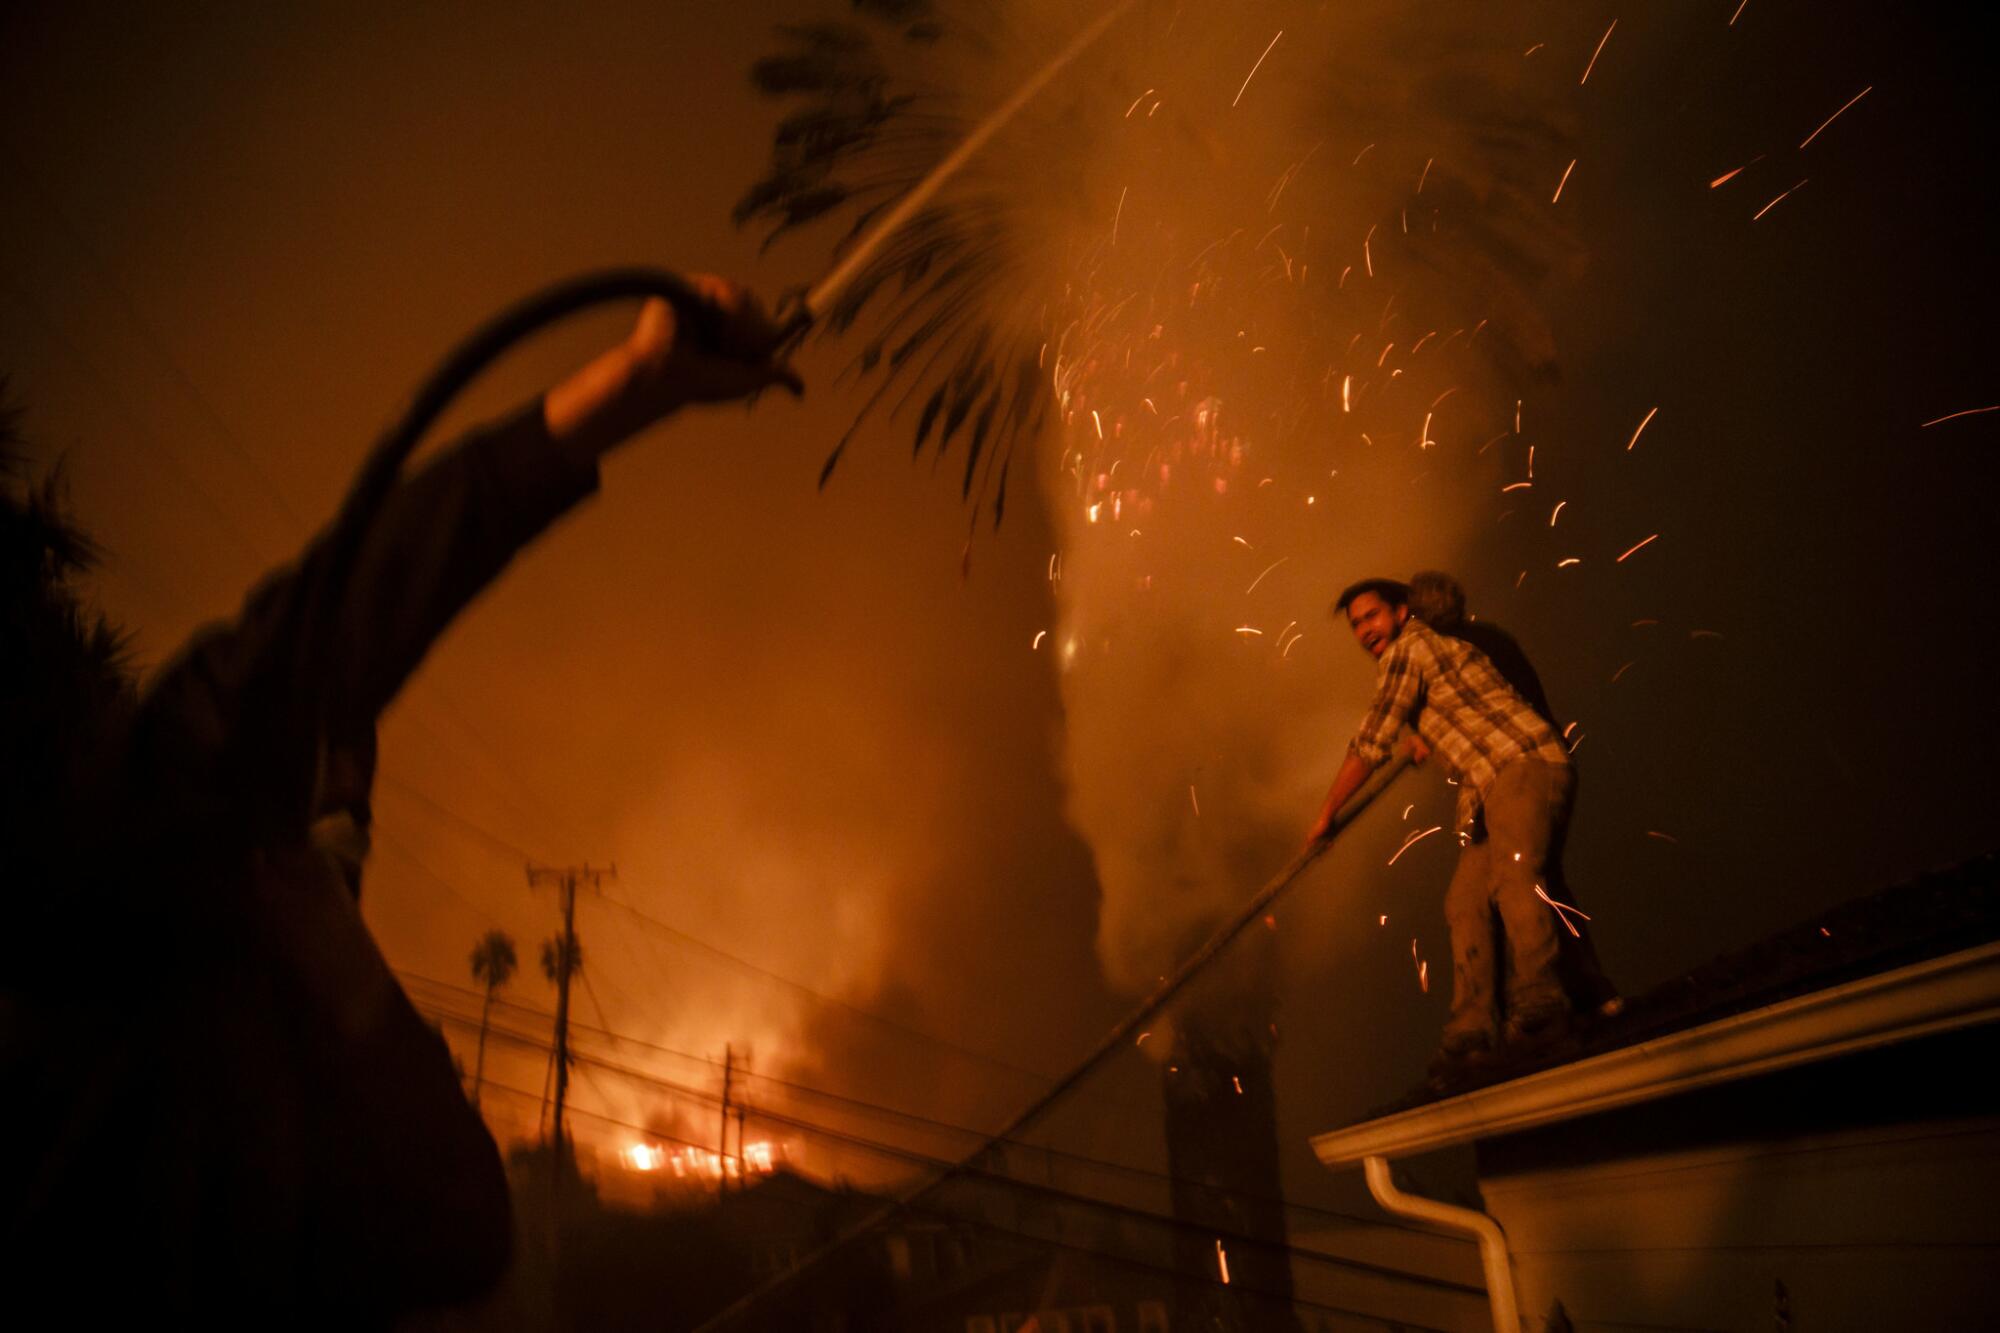 Strangers help put out a palm tree on fire as a brush fire threatens structures in Ventura, Calif., Dec. 5, 2017. 